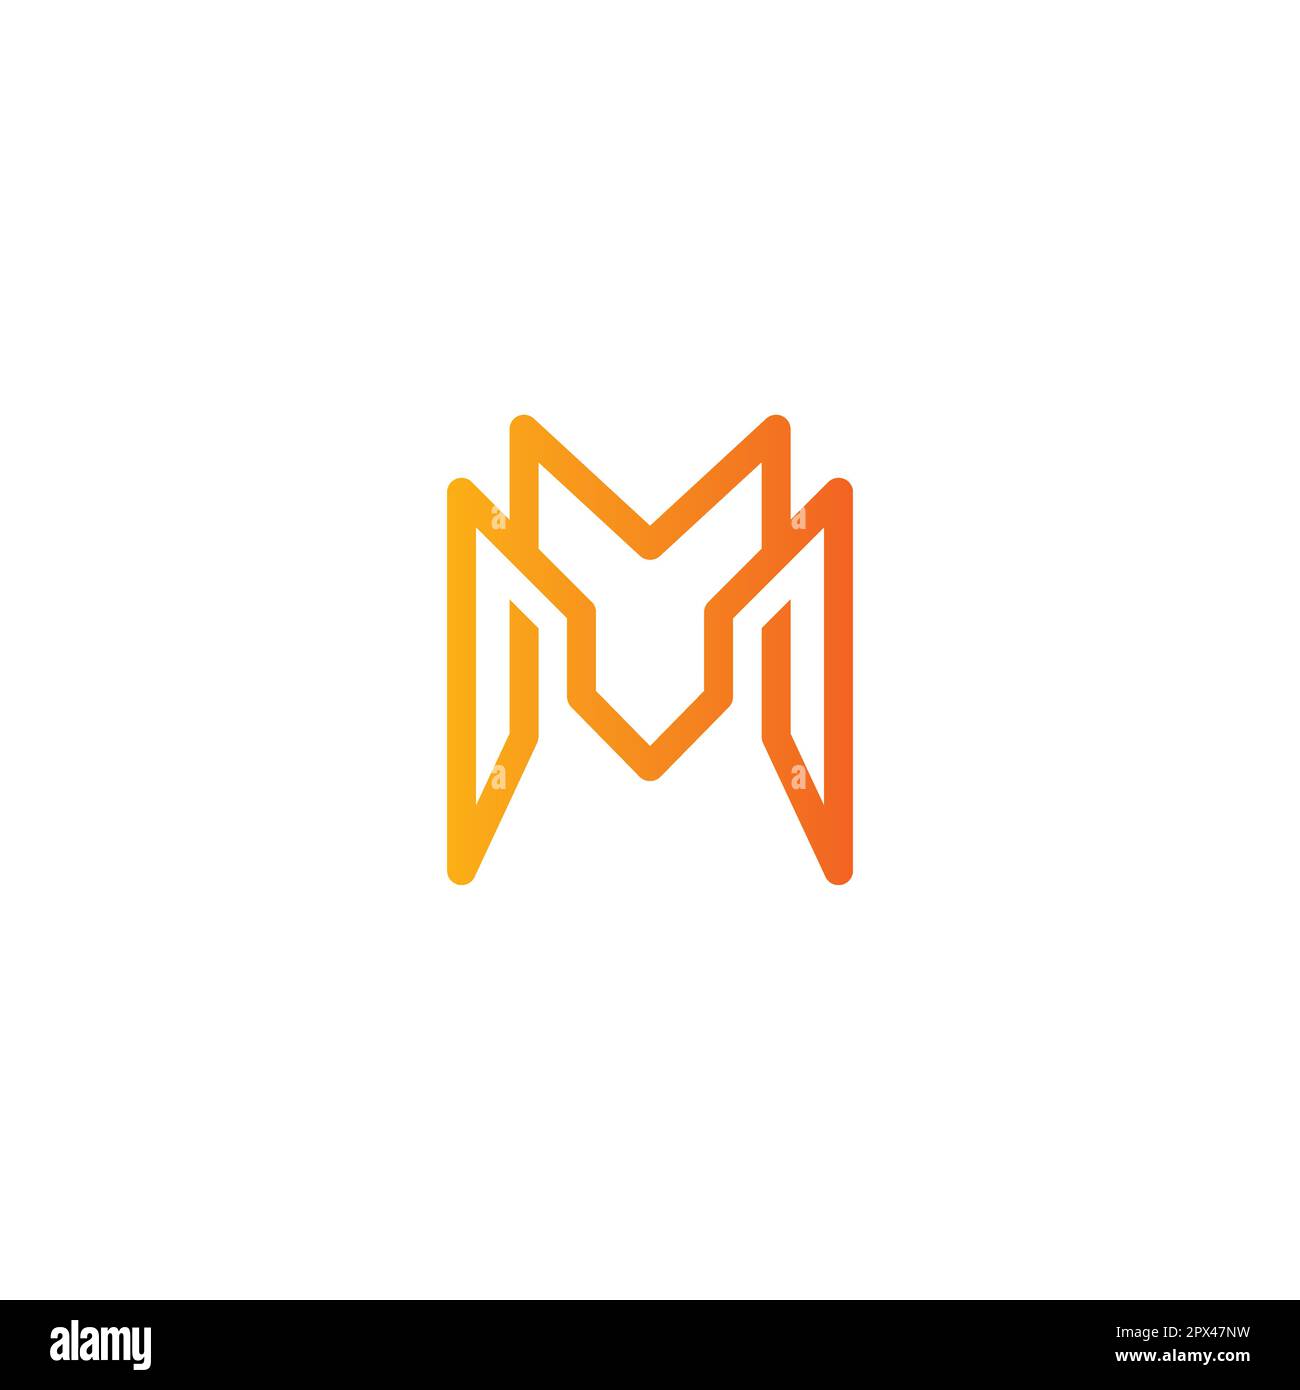 Premium Vector  Simple mm monogram logo suitable for any business with m  or mm initial